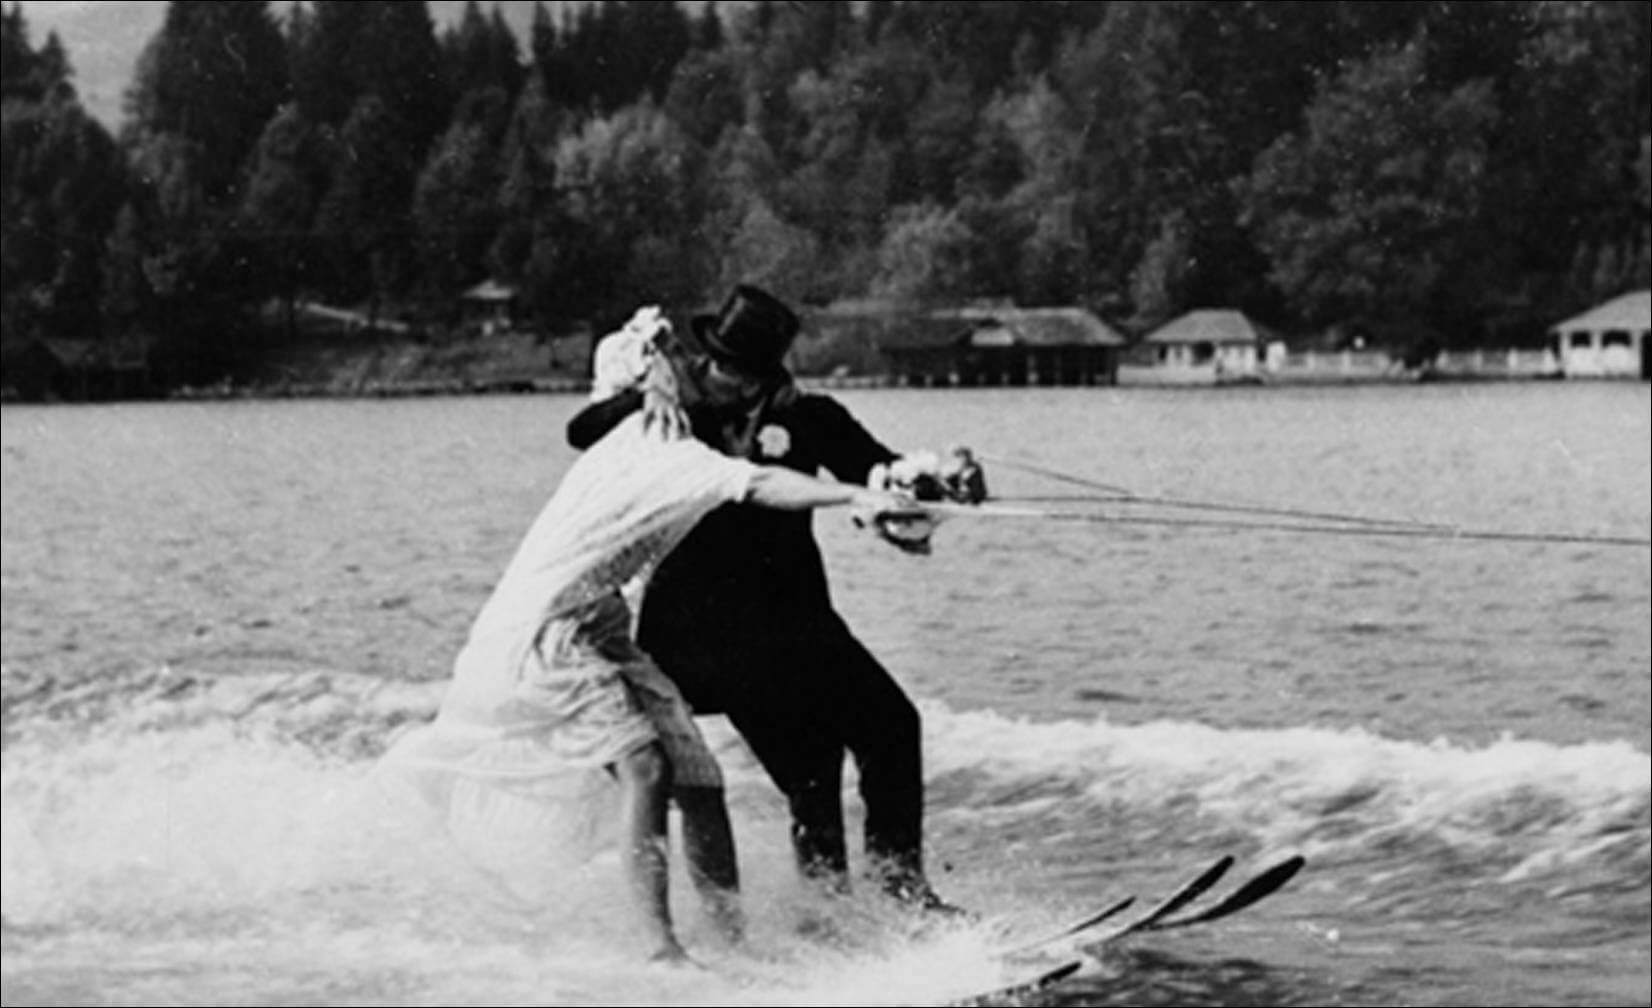 kiss while waterskiing in their wedding attire